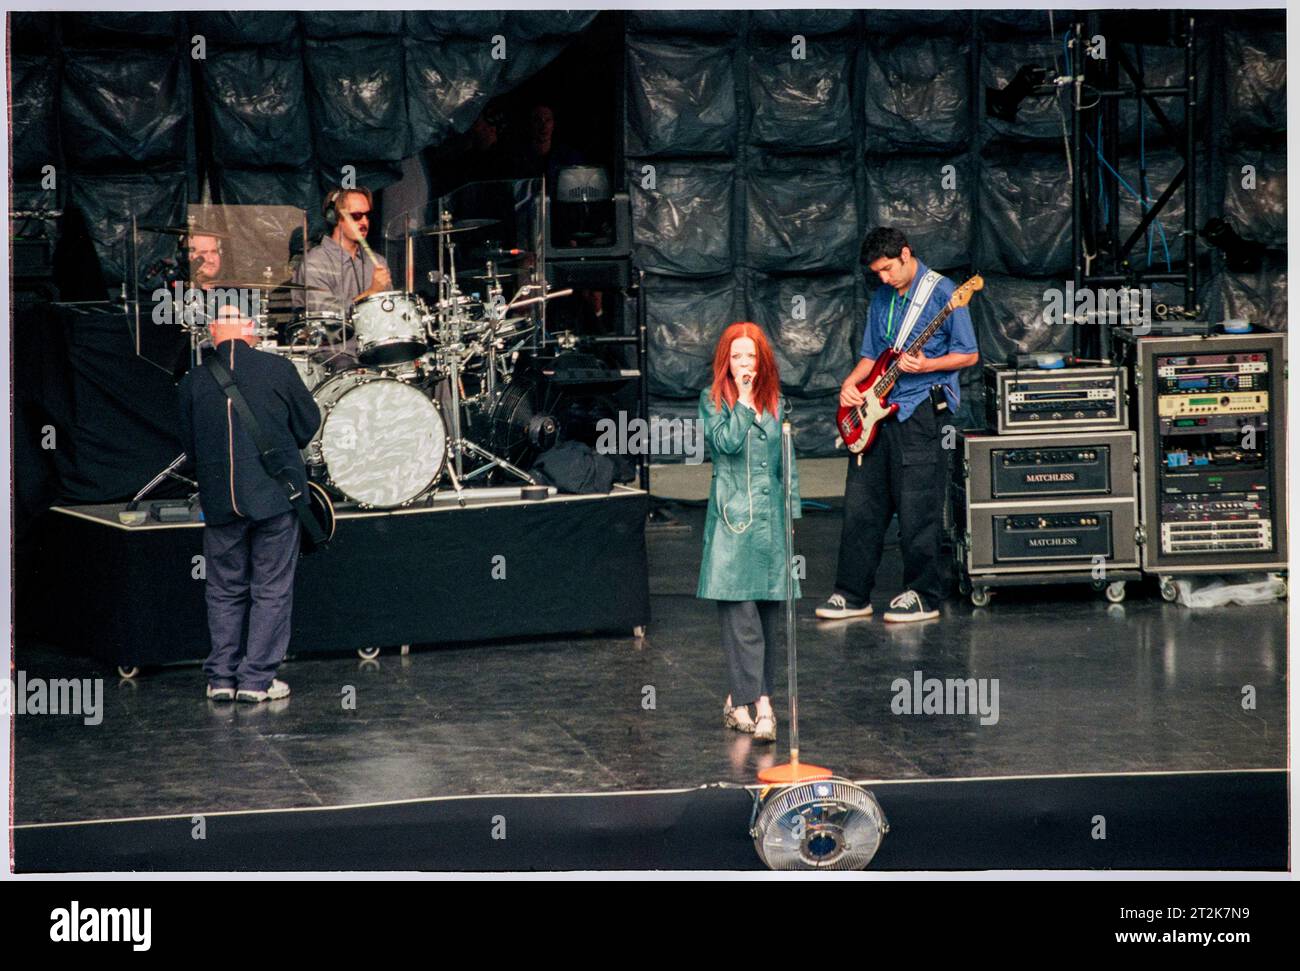 GARBAGE, EDINBURGH, 1999: The rock band Garbage soundchecking in Princes Street Gardens in Edinburgh, Scotland, UK before their command performance at the opening of the Scottish Parliament on July 1, 1999. Shirley Manson, the red haired lead singer of the band, is from Scotland, but the rest of the band are from Wisconsin. Photo: Rob Watkins Stock Photo